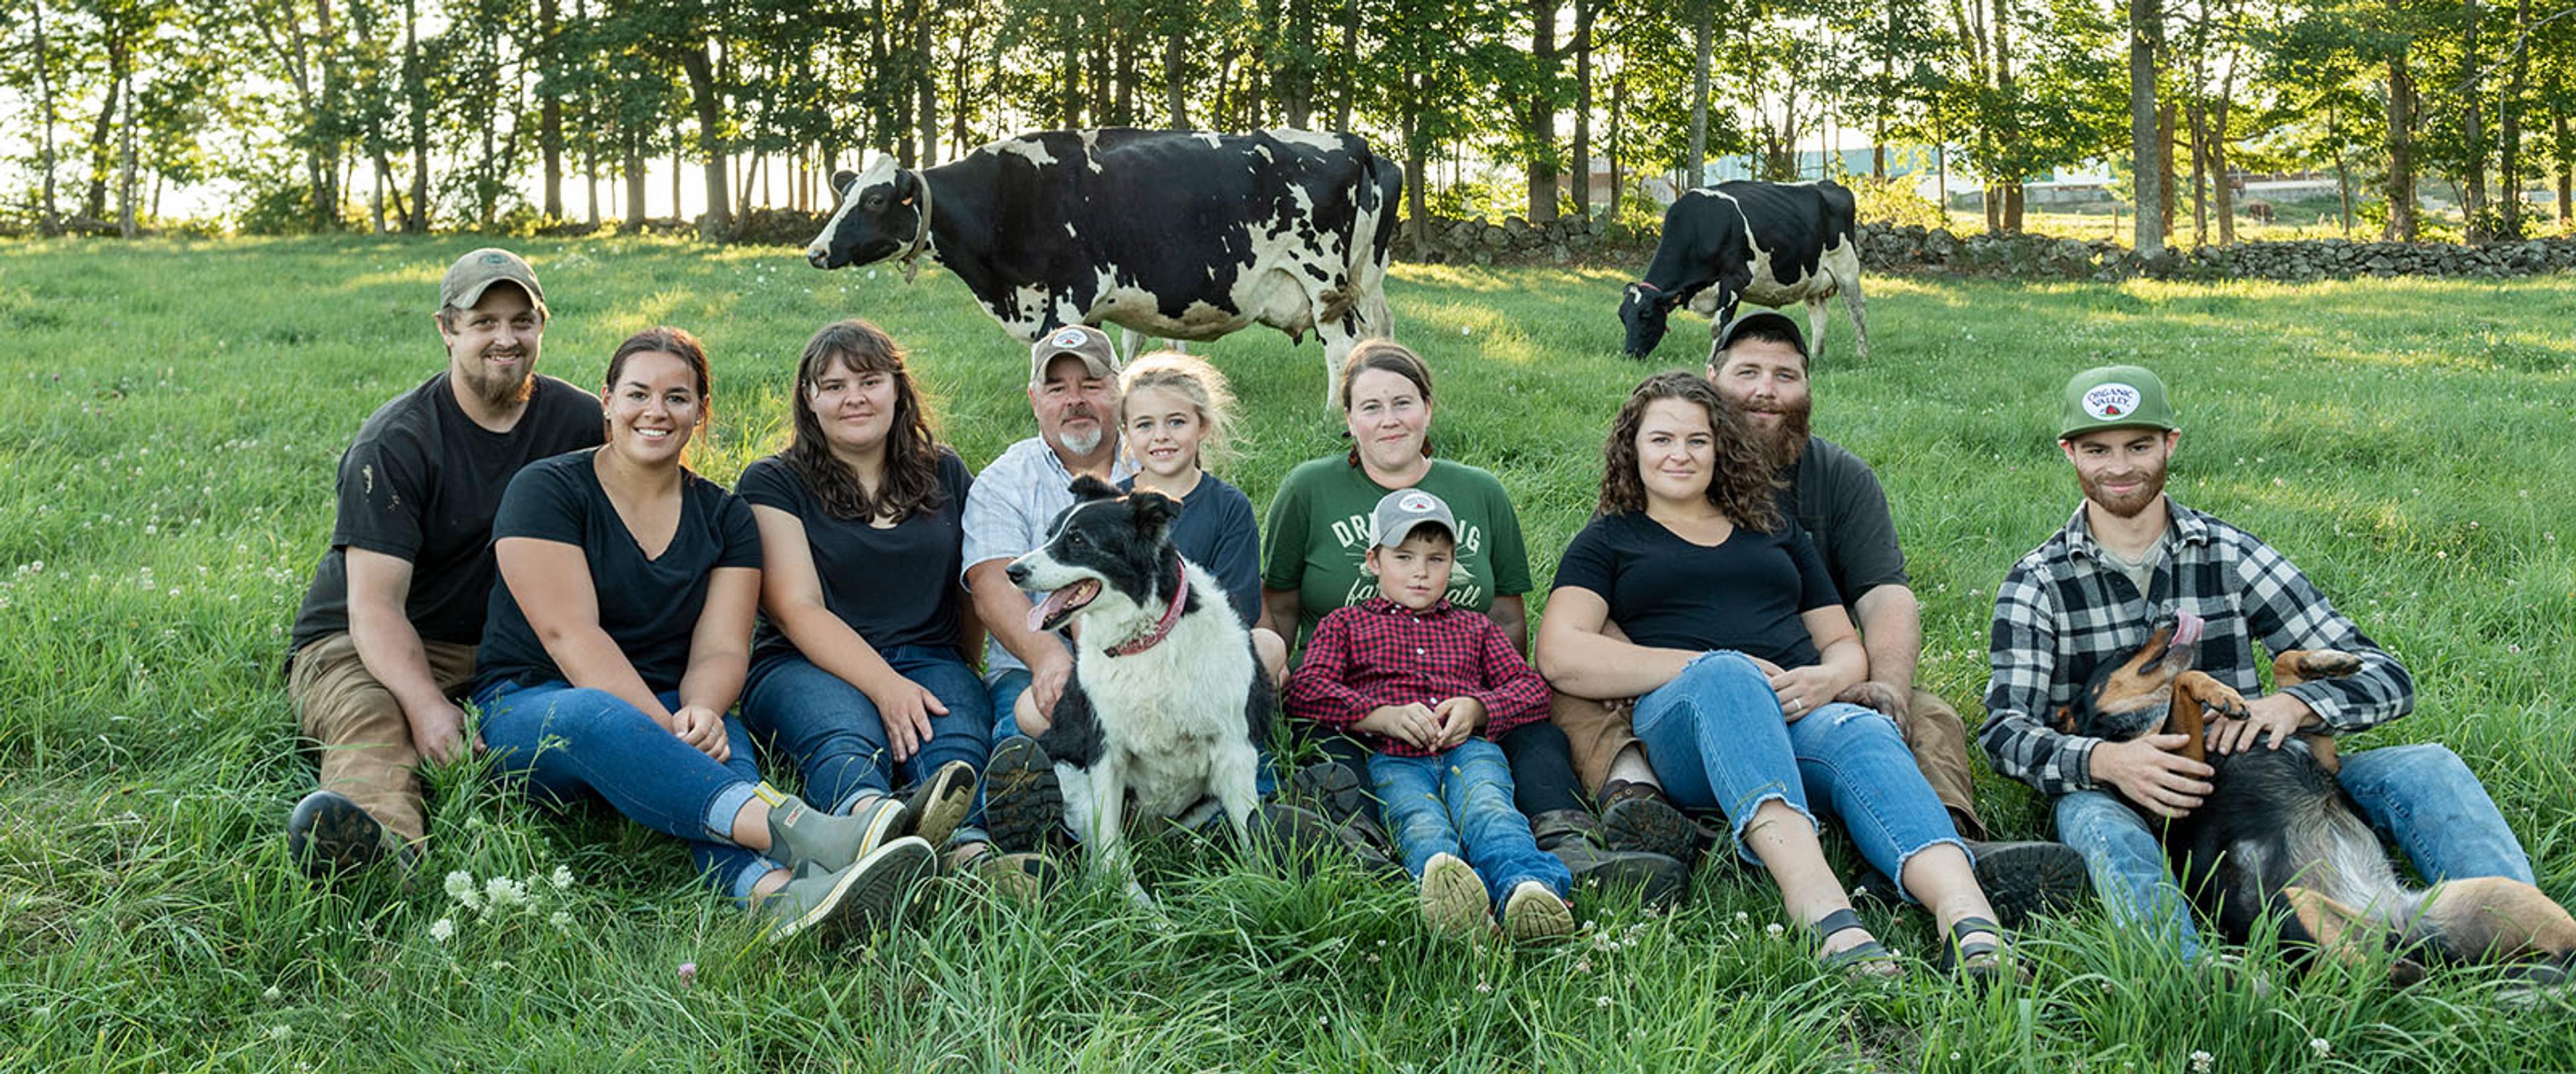 Mehuren family sits with cows in the background.